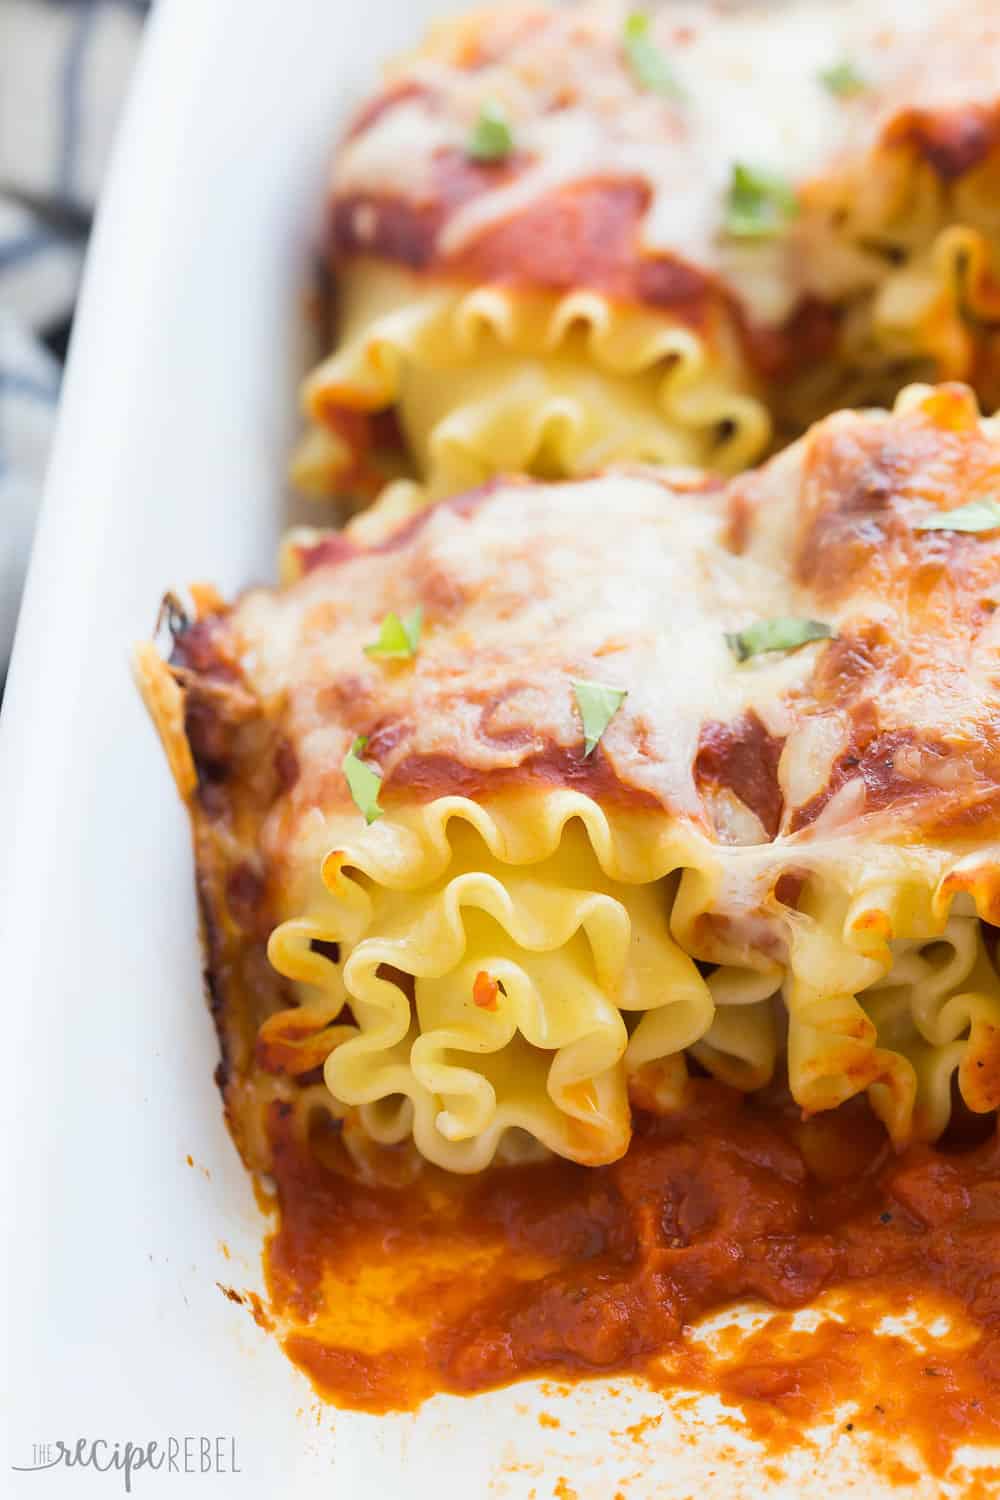 These Pepperoni Pizza Lasagna Rolls are an easy weeknight dinner, perfect for back to school! They can be made ahead or frozen.